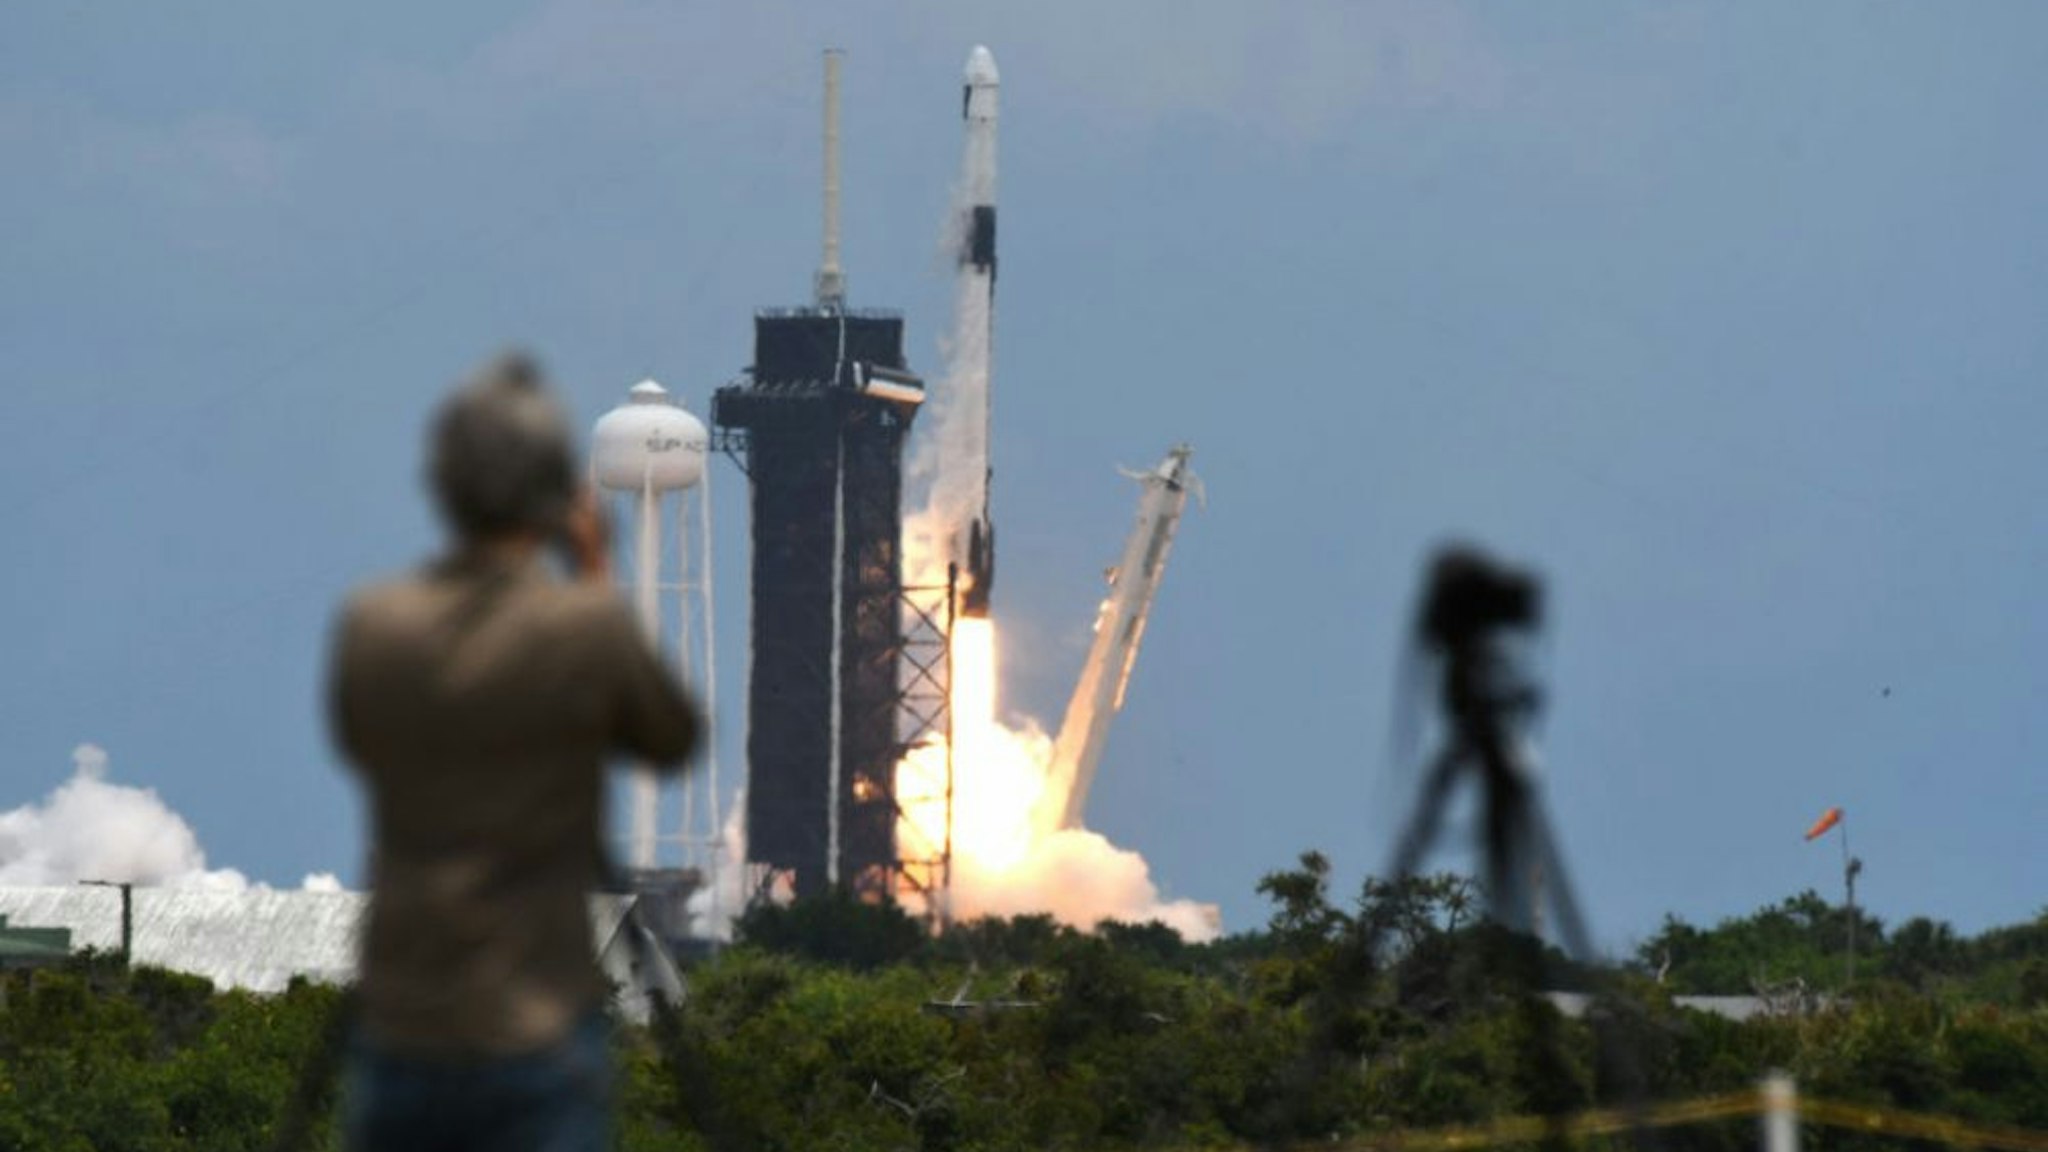 CAPE CANAVERAL, FLORIDA, UNITED STATES - 2021/06/03: A SpaceX Falcon 9 rocket with a Dragon 2 spacecraft carrying supplies to the International Space Station lifts off from pad 39A at the Kennedy Space Center. This is the 22nd resupply mission for NASA by SpaceX.